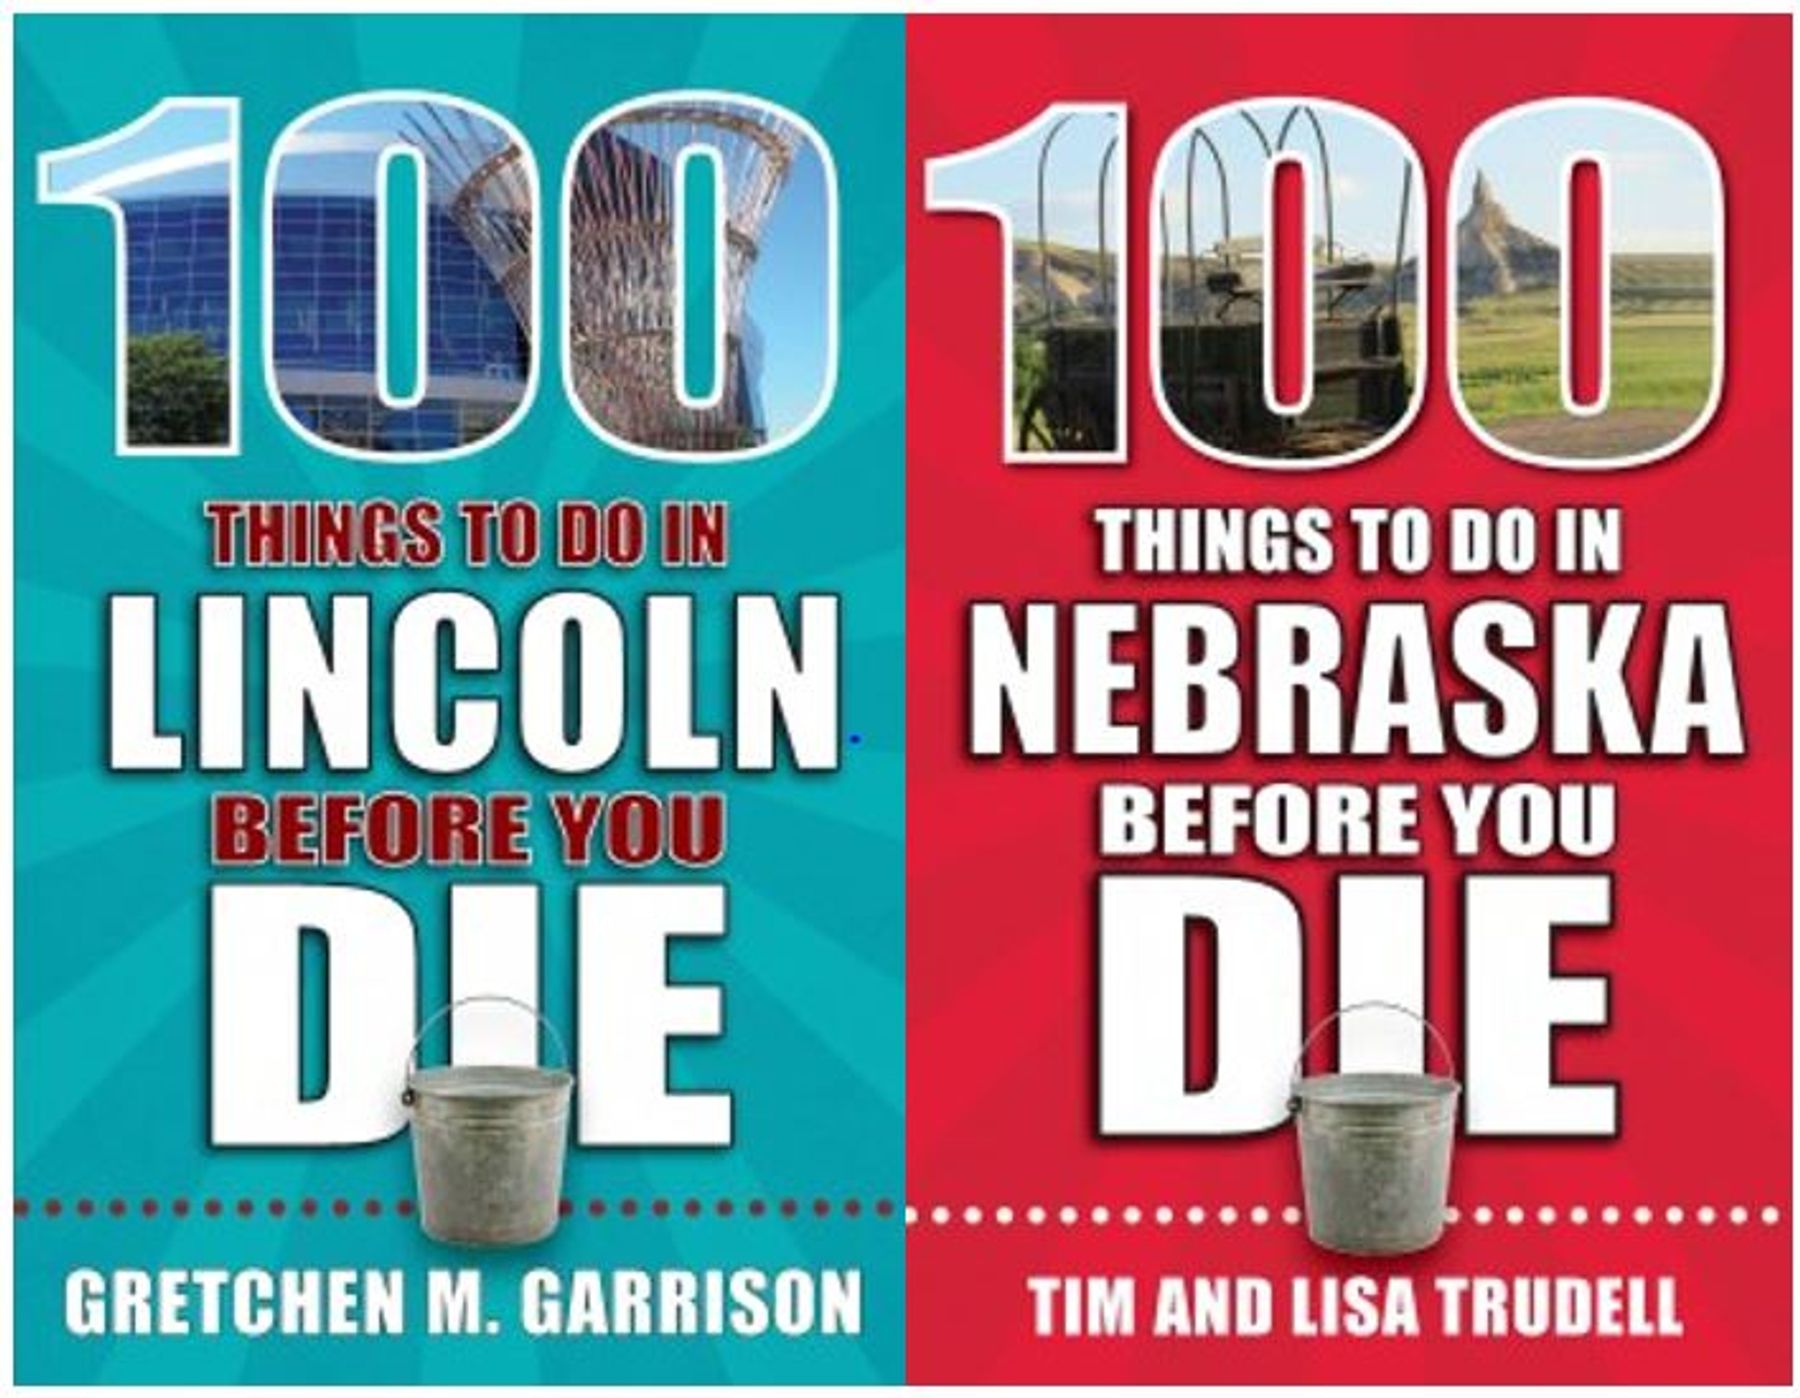 Book Signing - Gretchen Garrison and Tim & Lisa Trudell | Downtown Lincoln